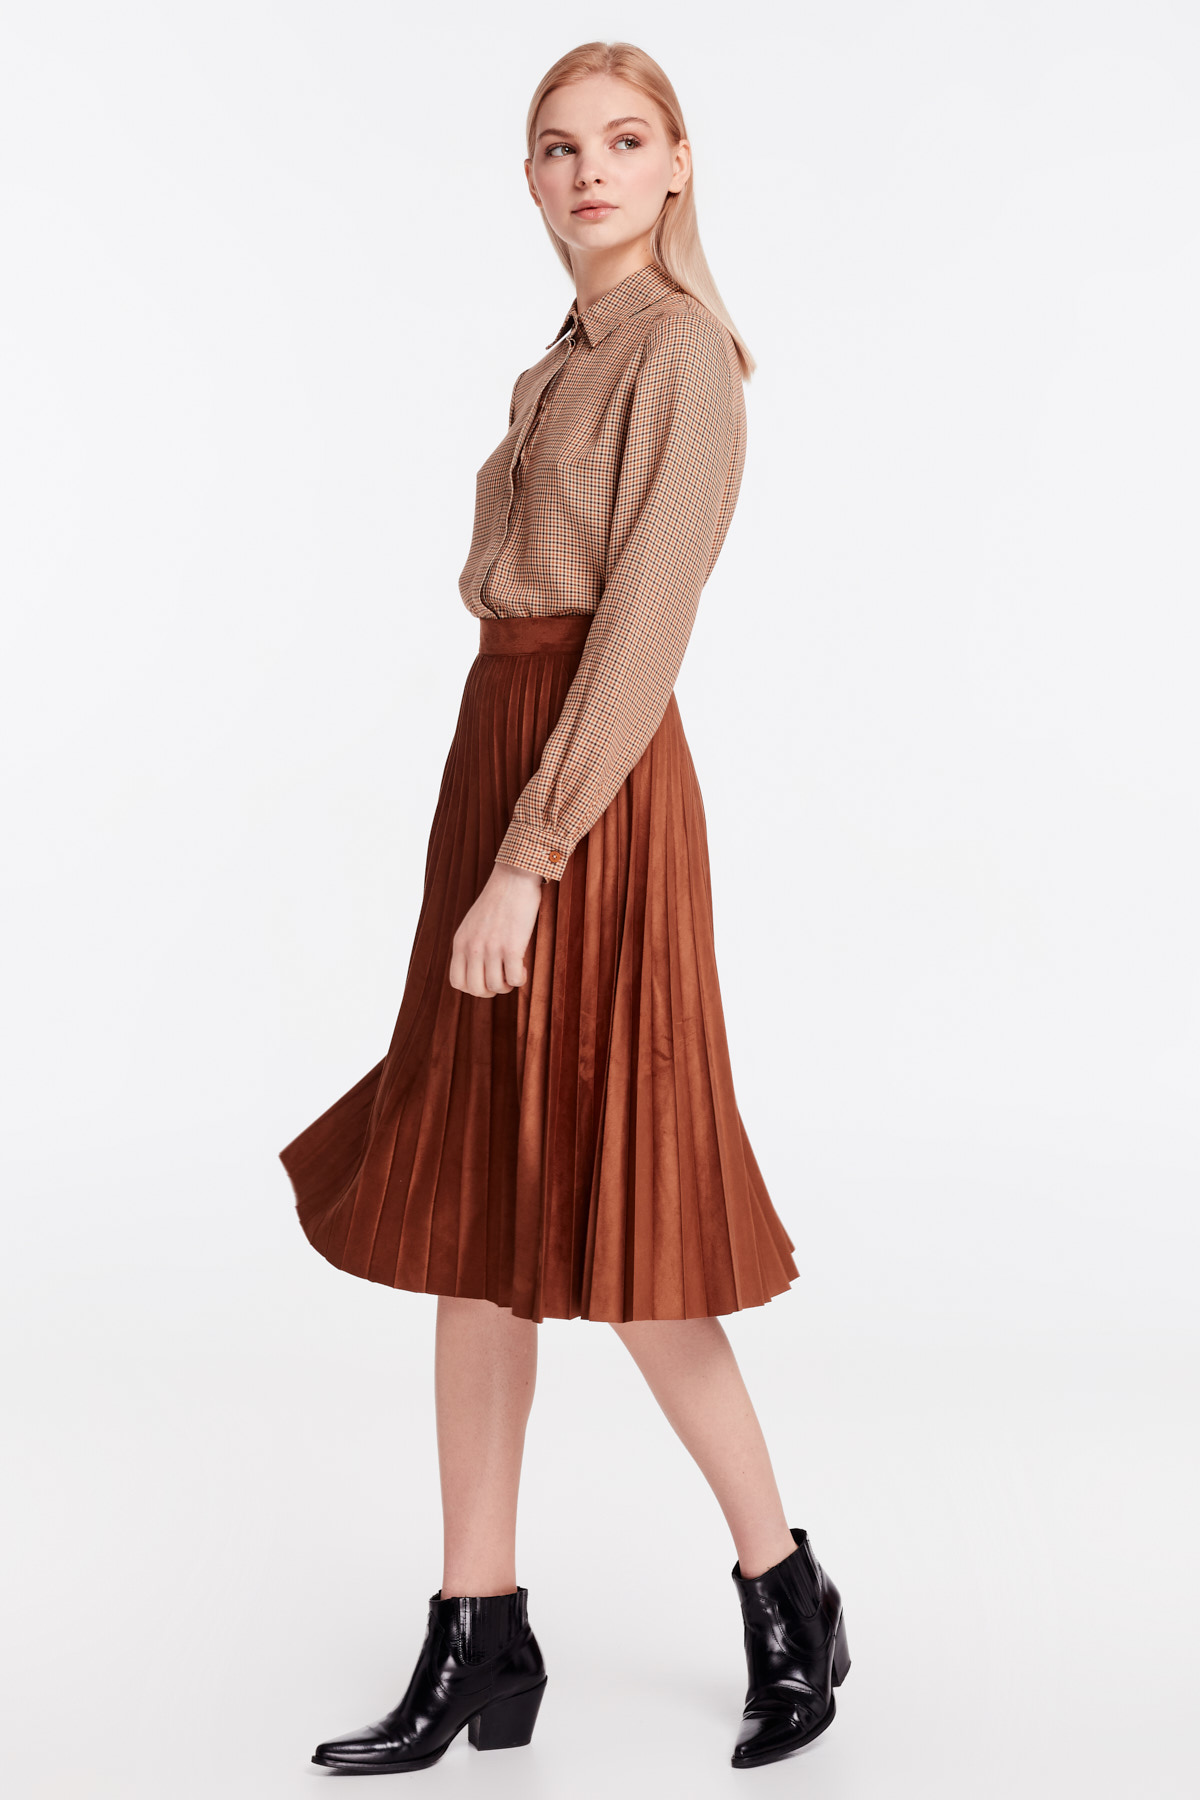 Brown suede pleated skirt, photo 5